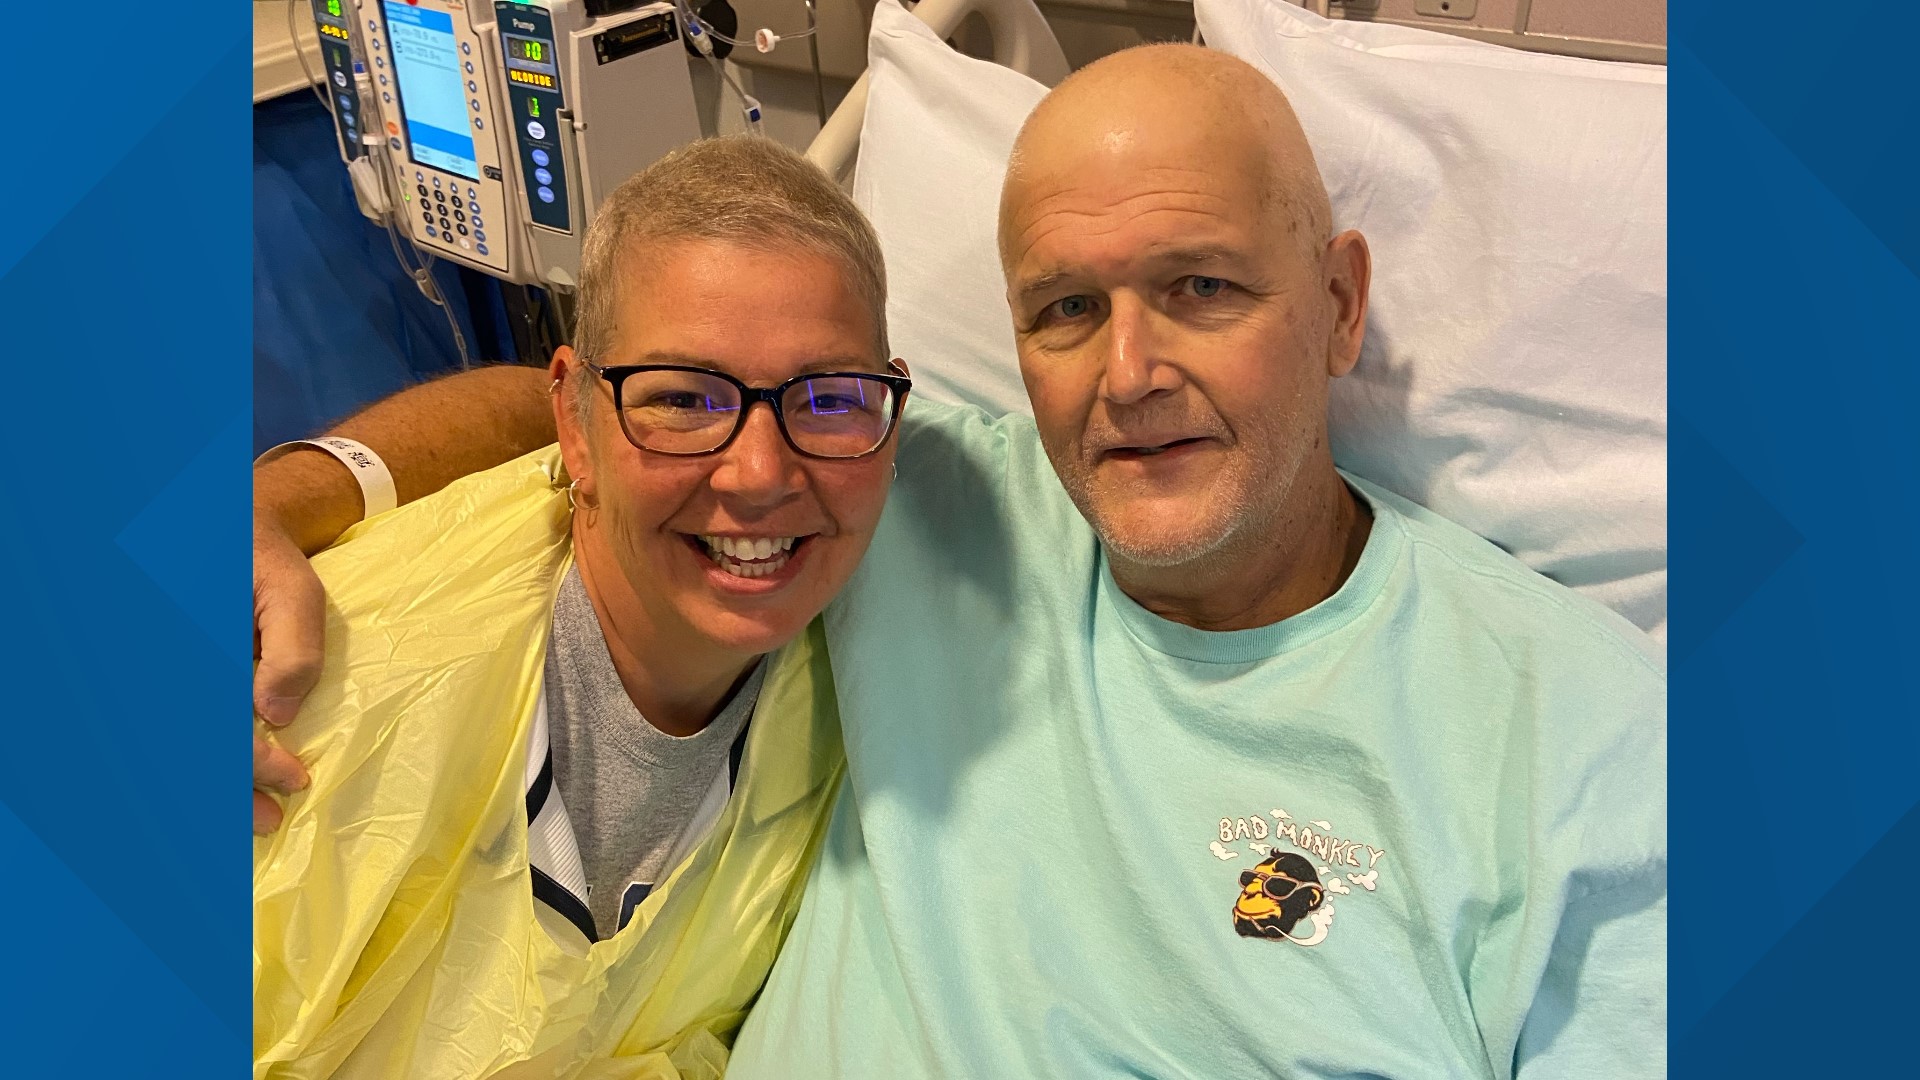 In February 2022, Thomas found out he was diagnosed with leukemia, and soon after, in May 2022, Pamela found out she was diagnosed with breast cancer.